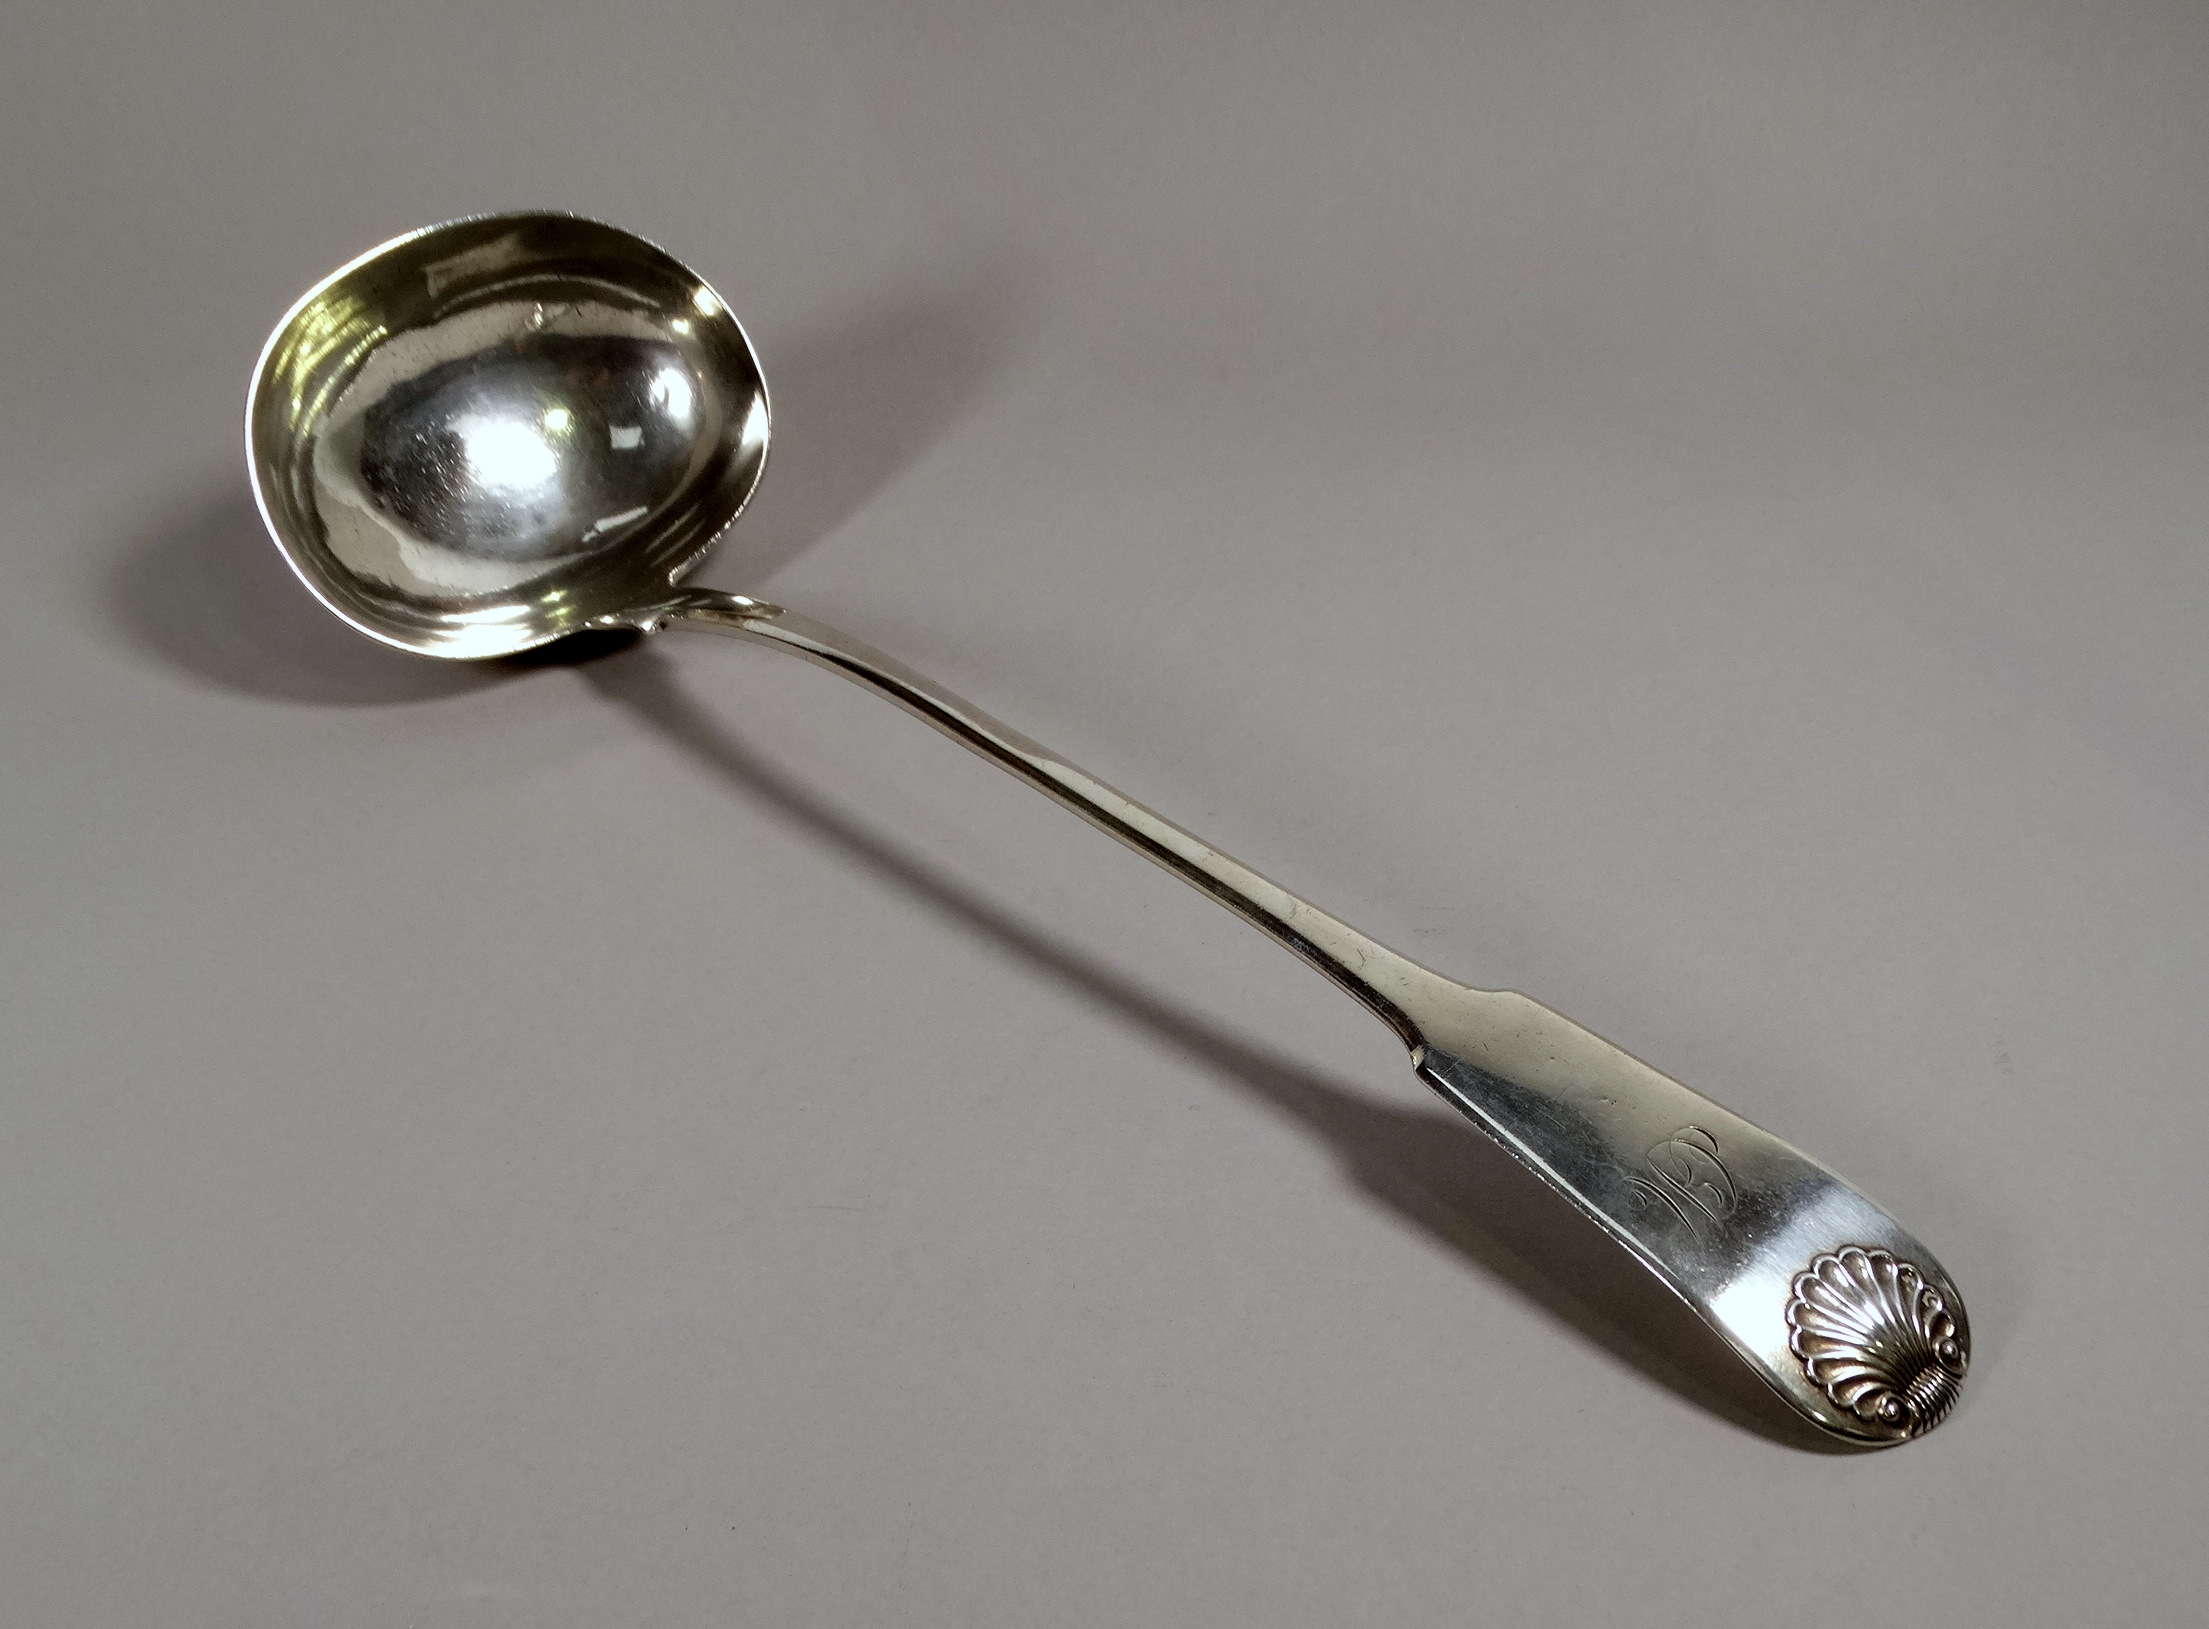 A large silver ladle - Edinburgh 1820, Andrew Wilkie, fiddle back with scallop shell and engraved